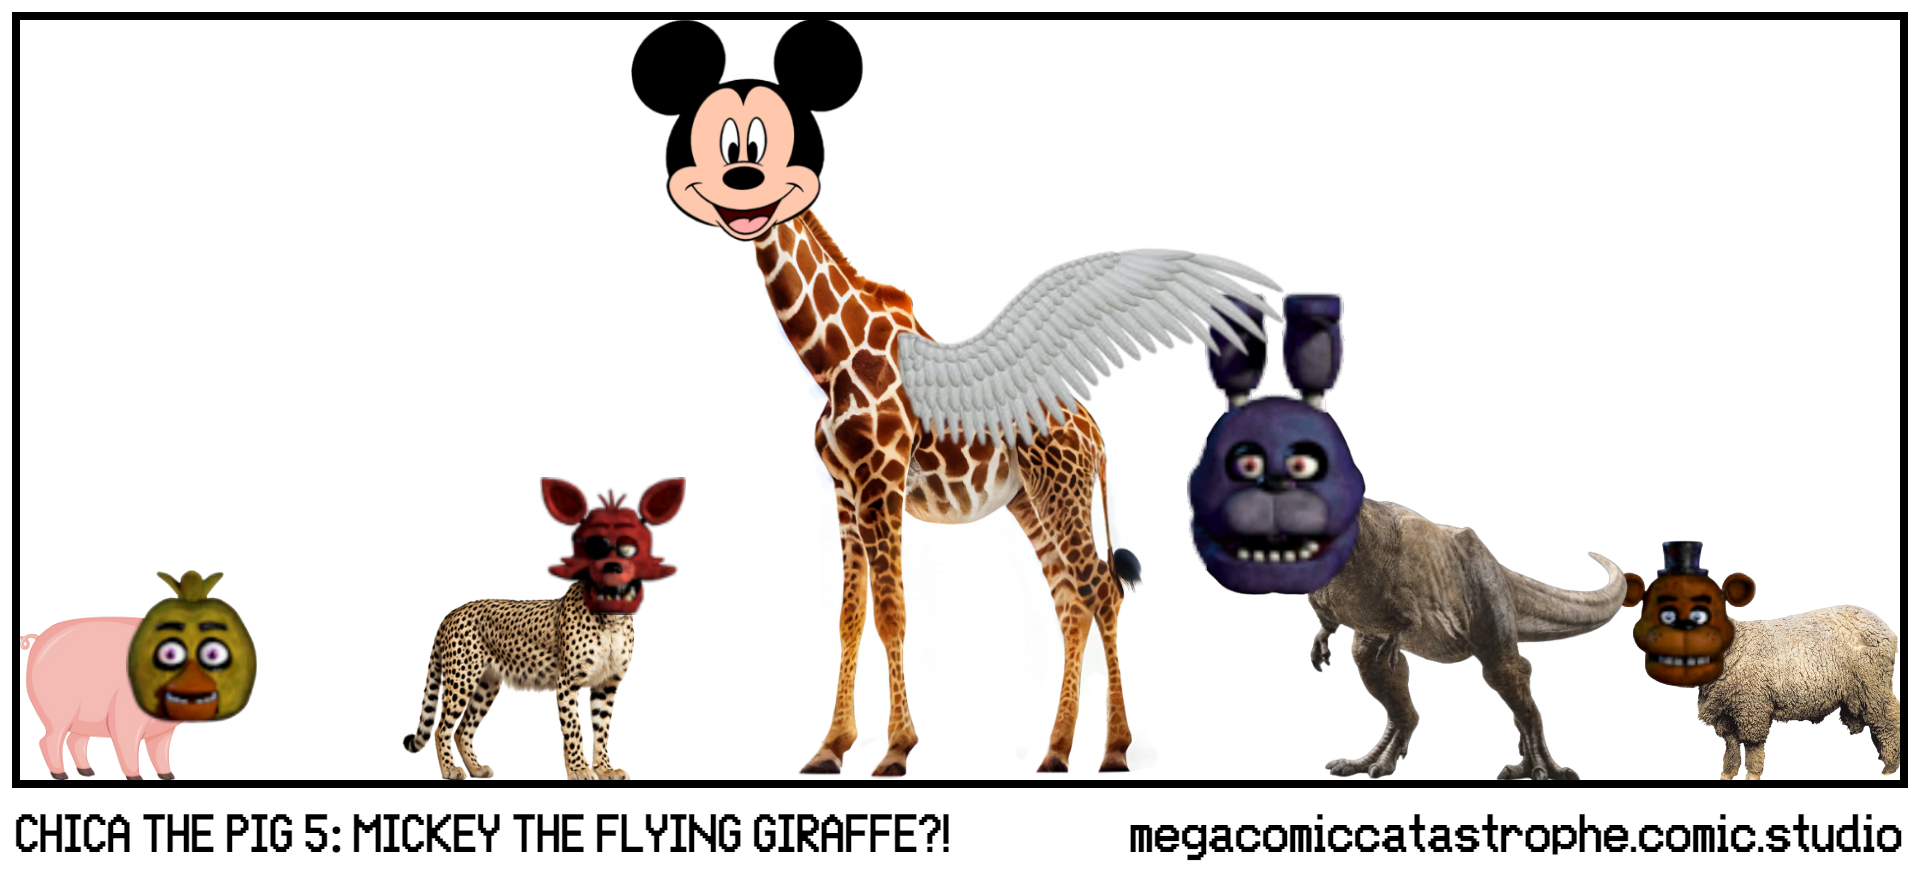 CHICA THE PIG 5: MICKEY THE FLYING GIRAFFE?!